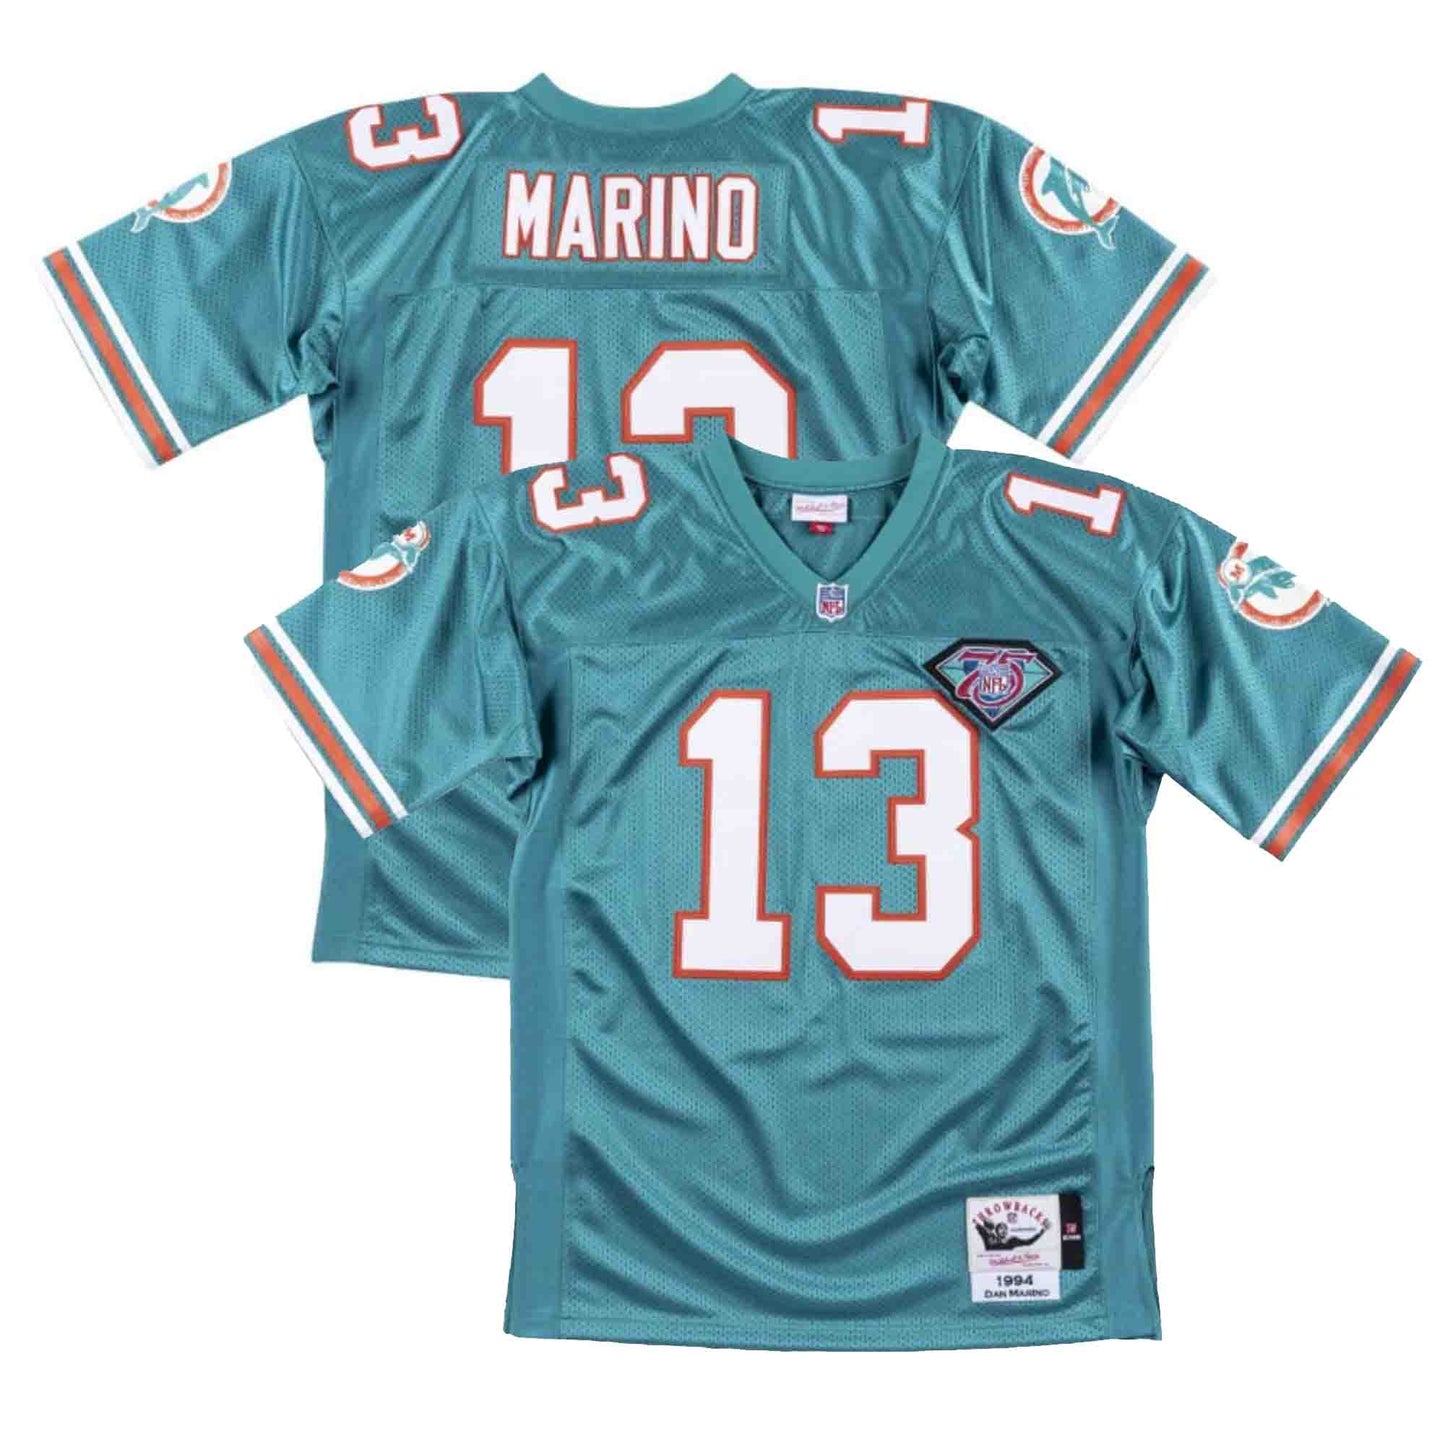 NFL Authentic Jersey Miami Dolphins Dan Marino #13 – Broskiclothing